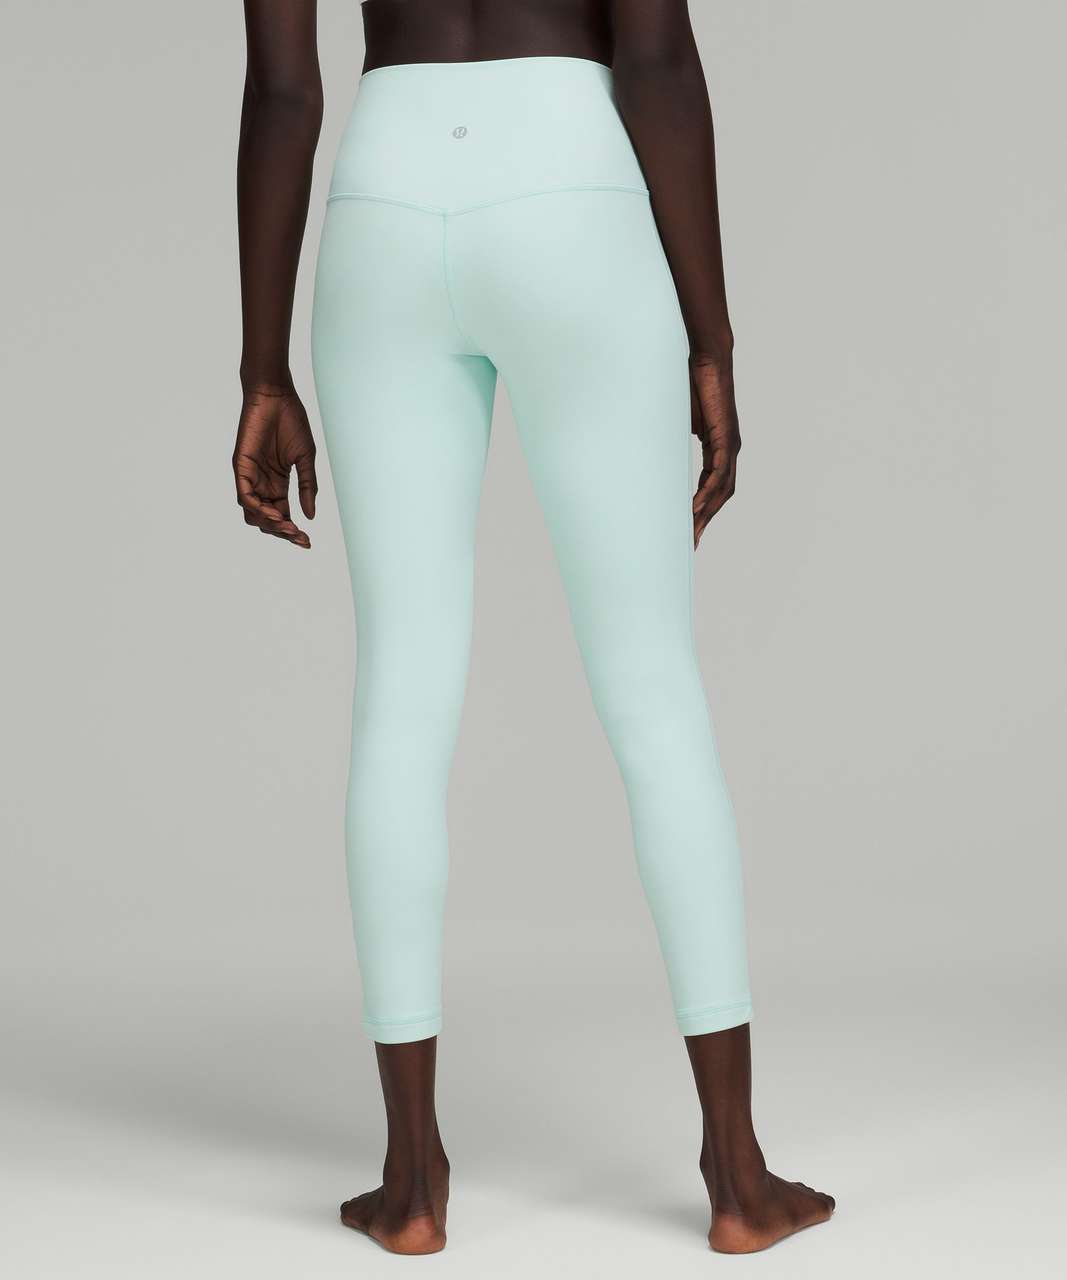 NWT Lululemon Align Pant Size 6 Delicate Mint 28 Double Lined Sold Out!